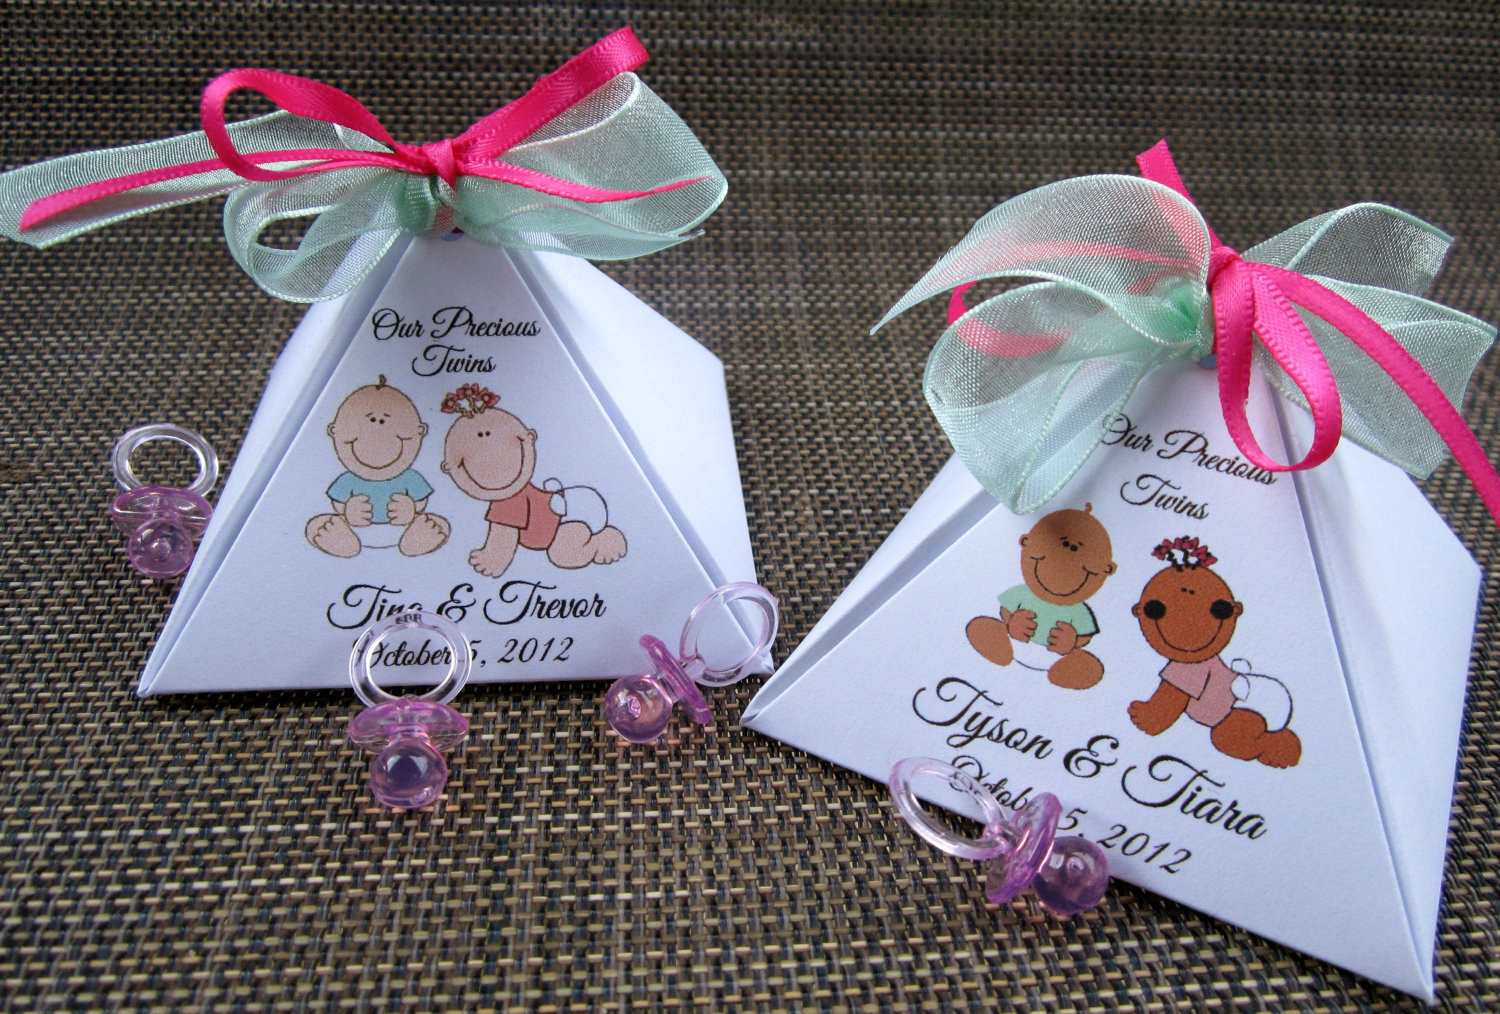 Twin Baby Shower Decoration Ideas
 Twins Baby Shower Decorations